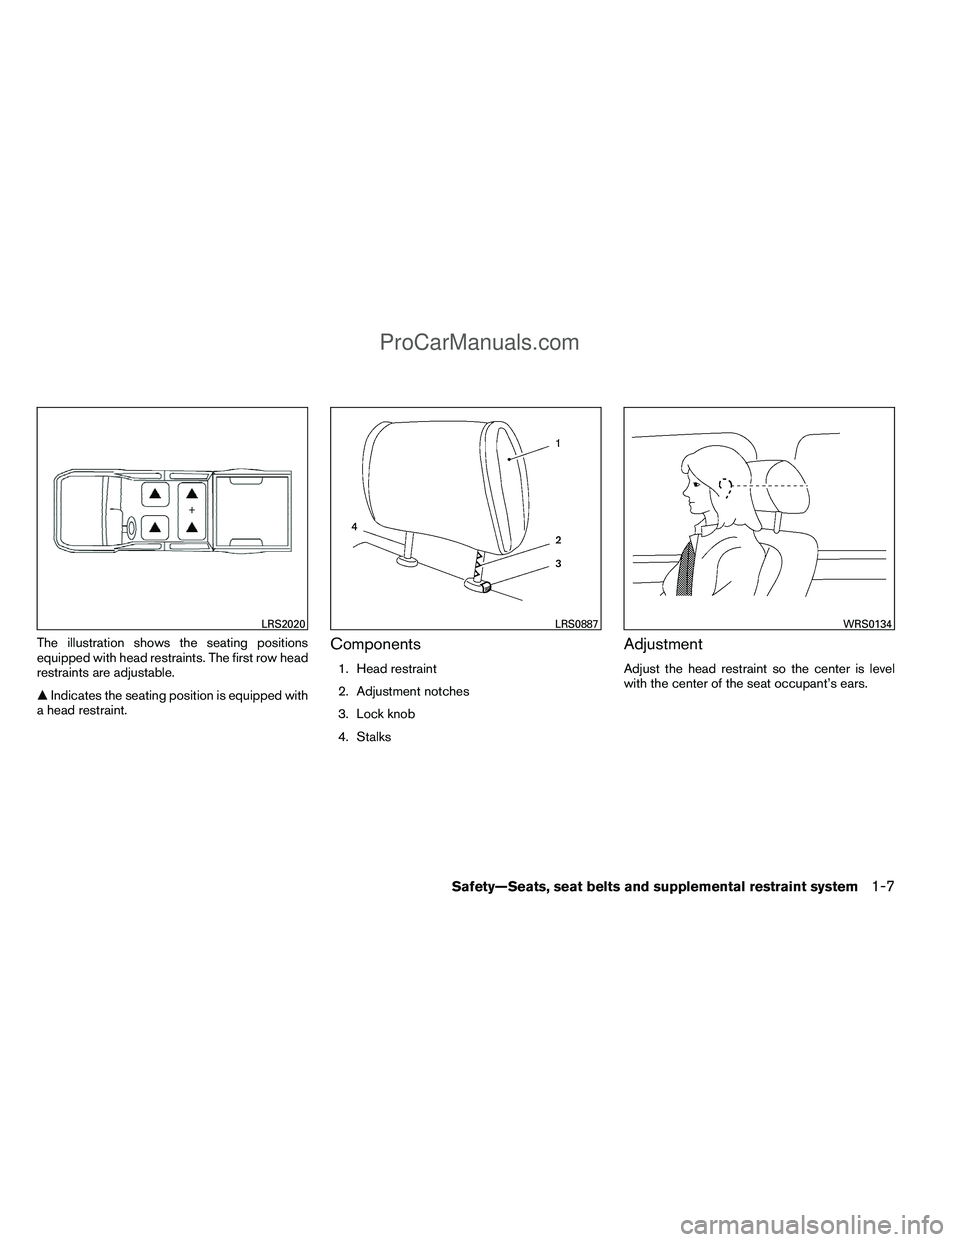 NISSAN TITAN 2012  Owners Manual The illustration shows the seating positions
equipped with head restraints. The first row head
restraints are adjustable.
Indicates the seating position is equipped with
a head restraint.Components
1